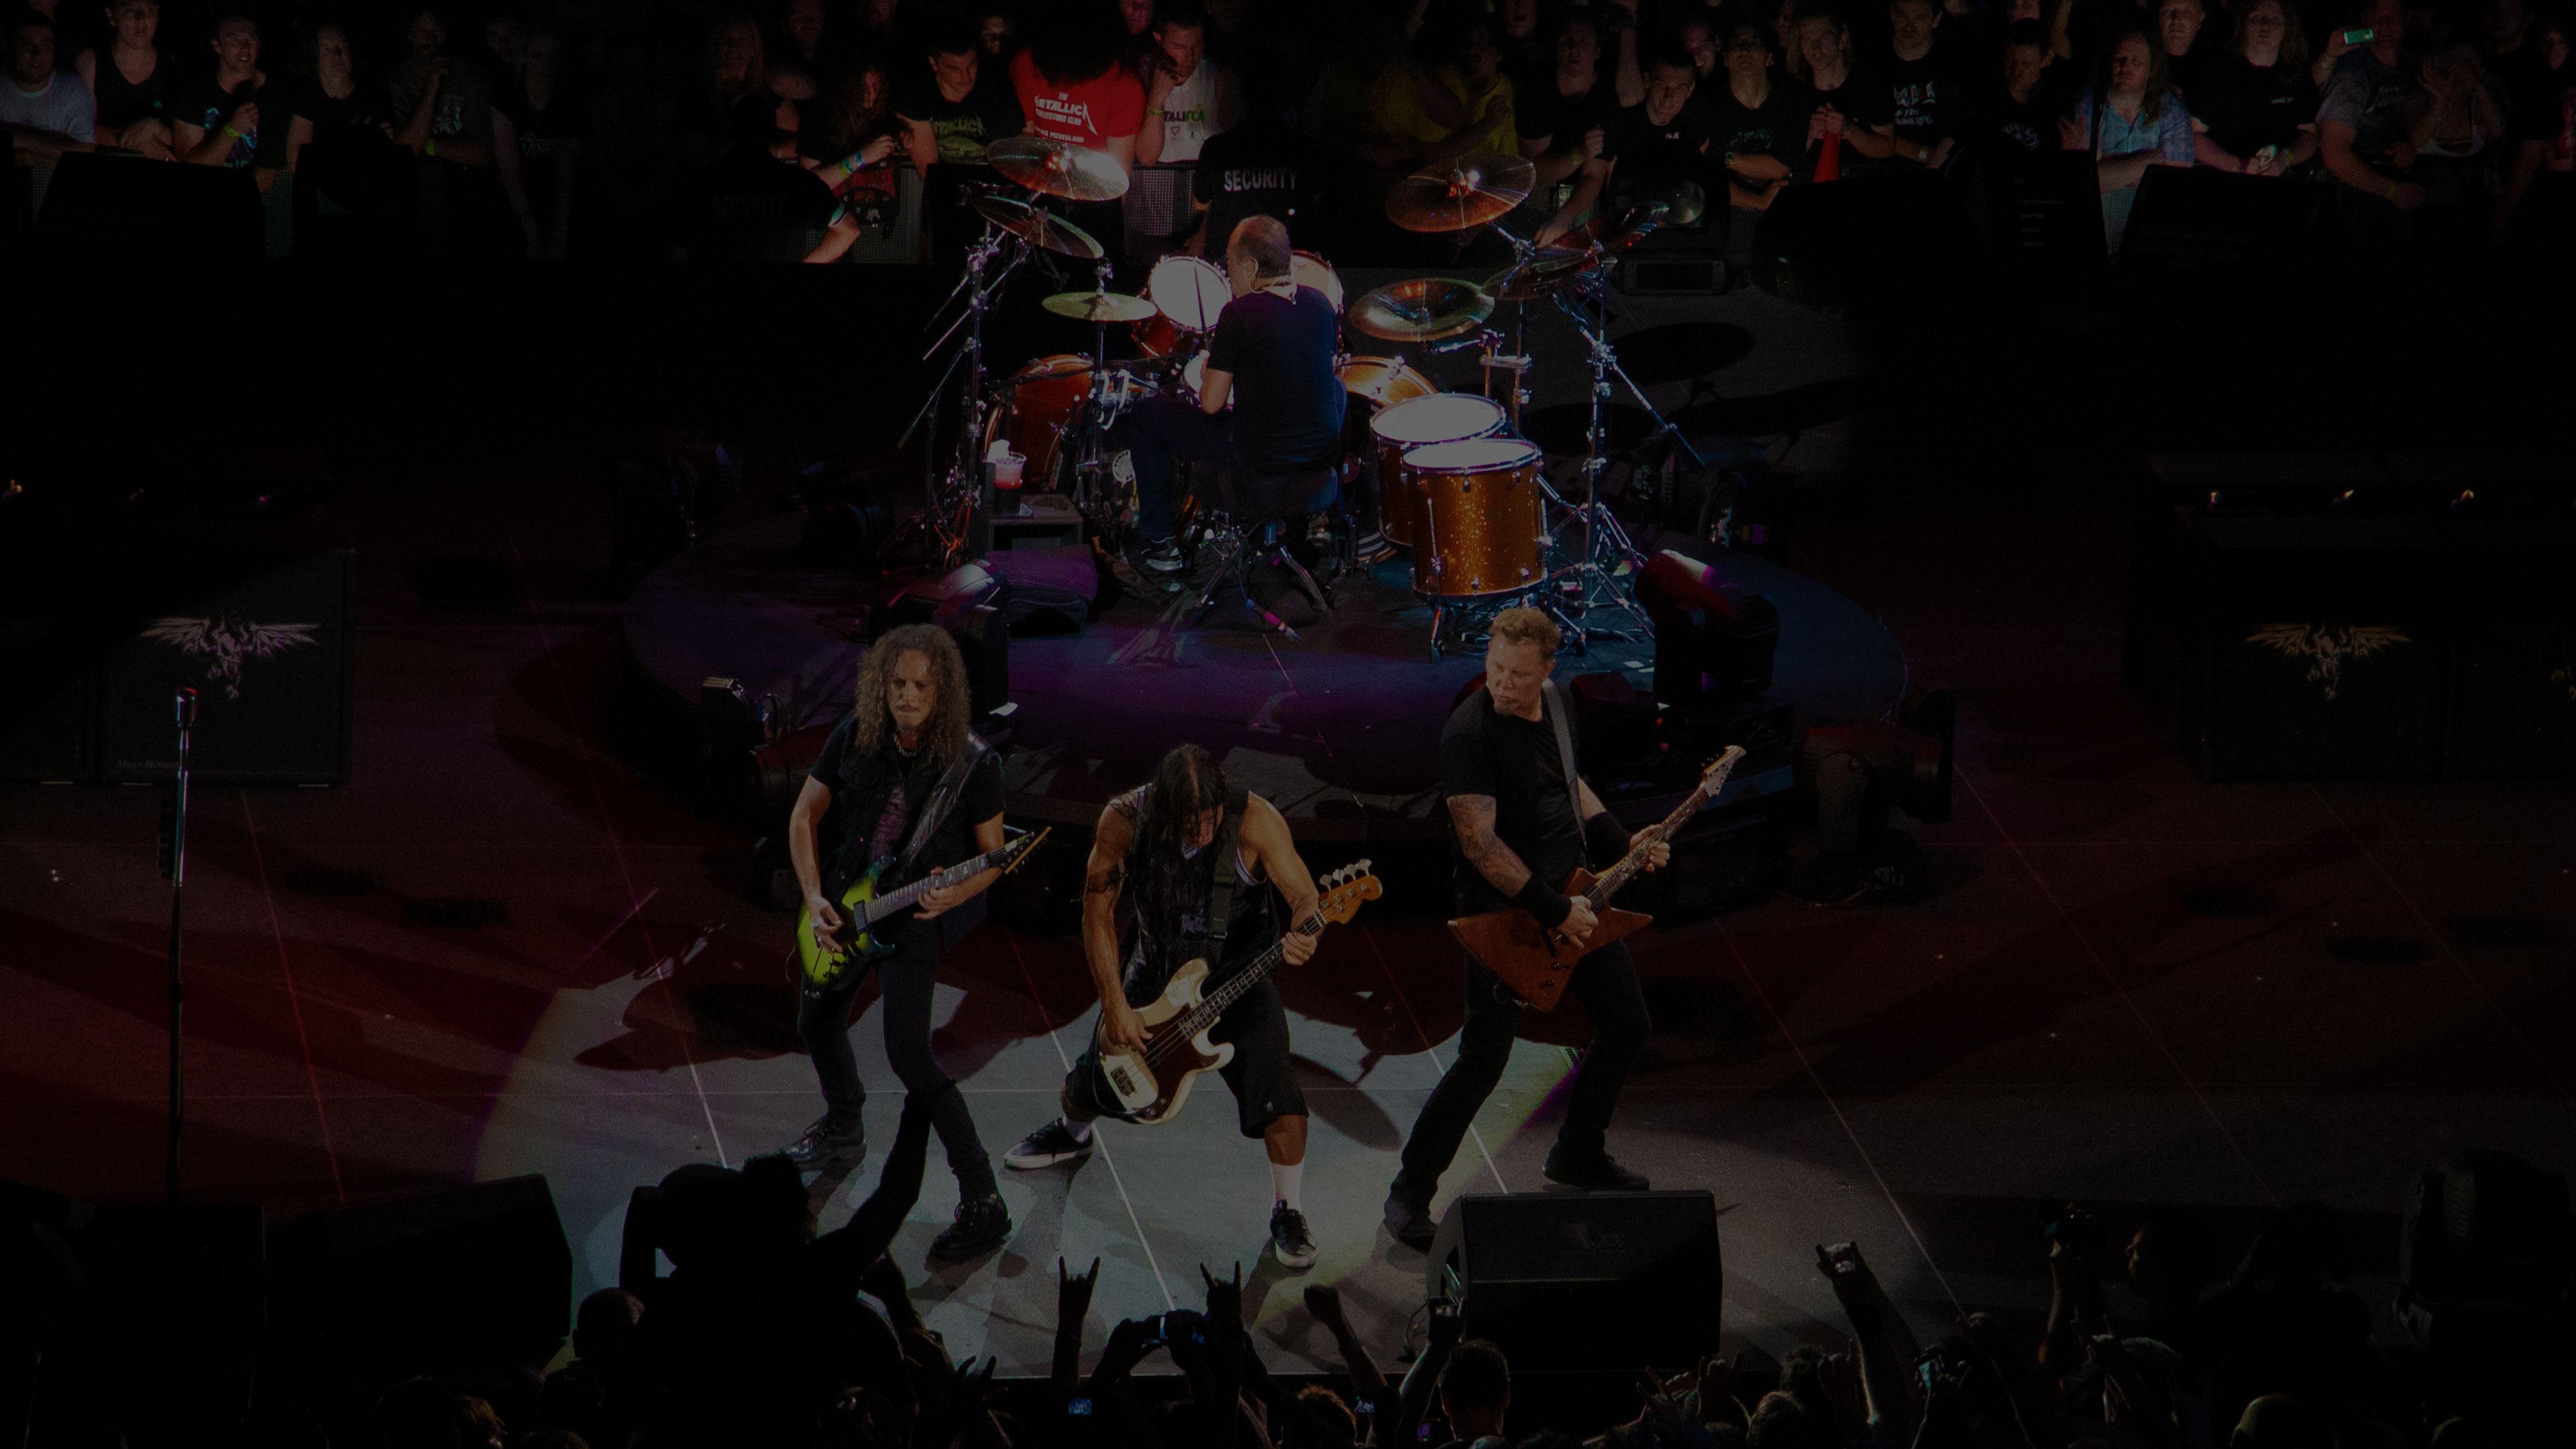 Banner Image for the photo gallery from the gig in Sydney, Australia shot on November 13, 2010